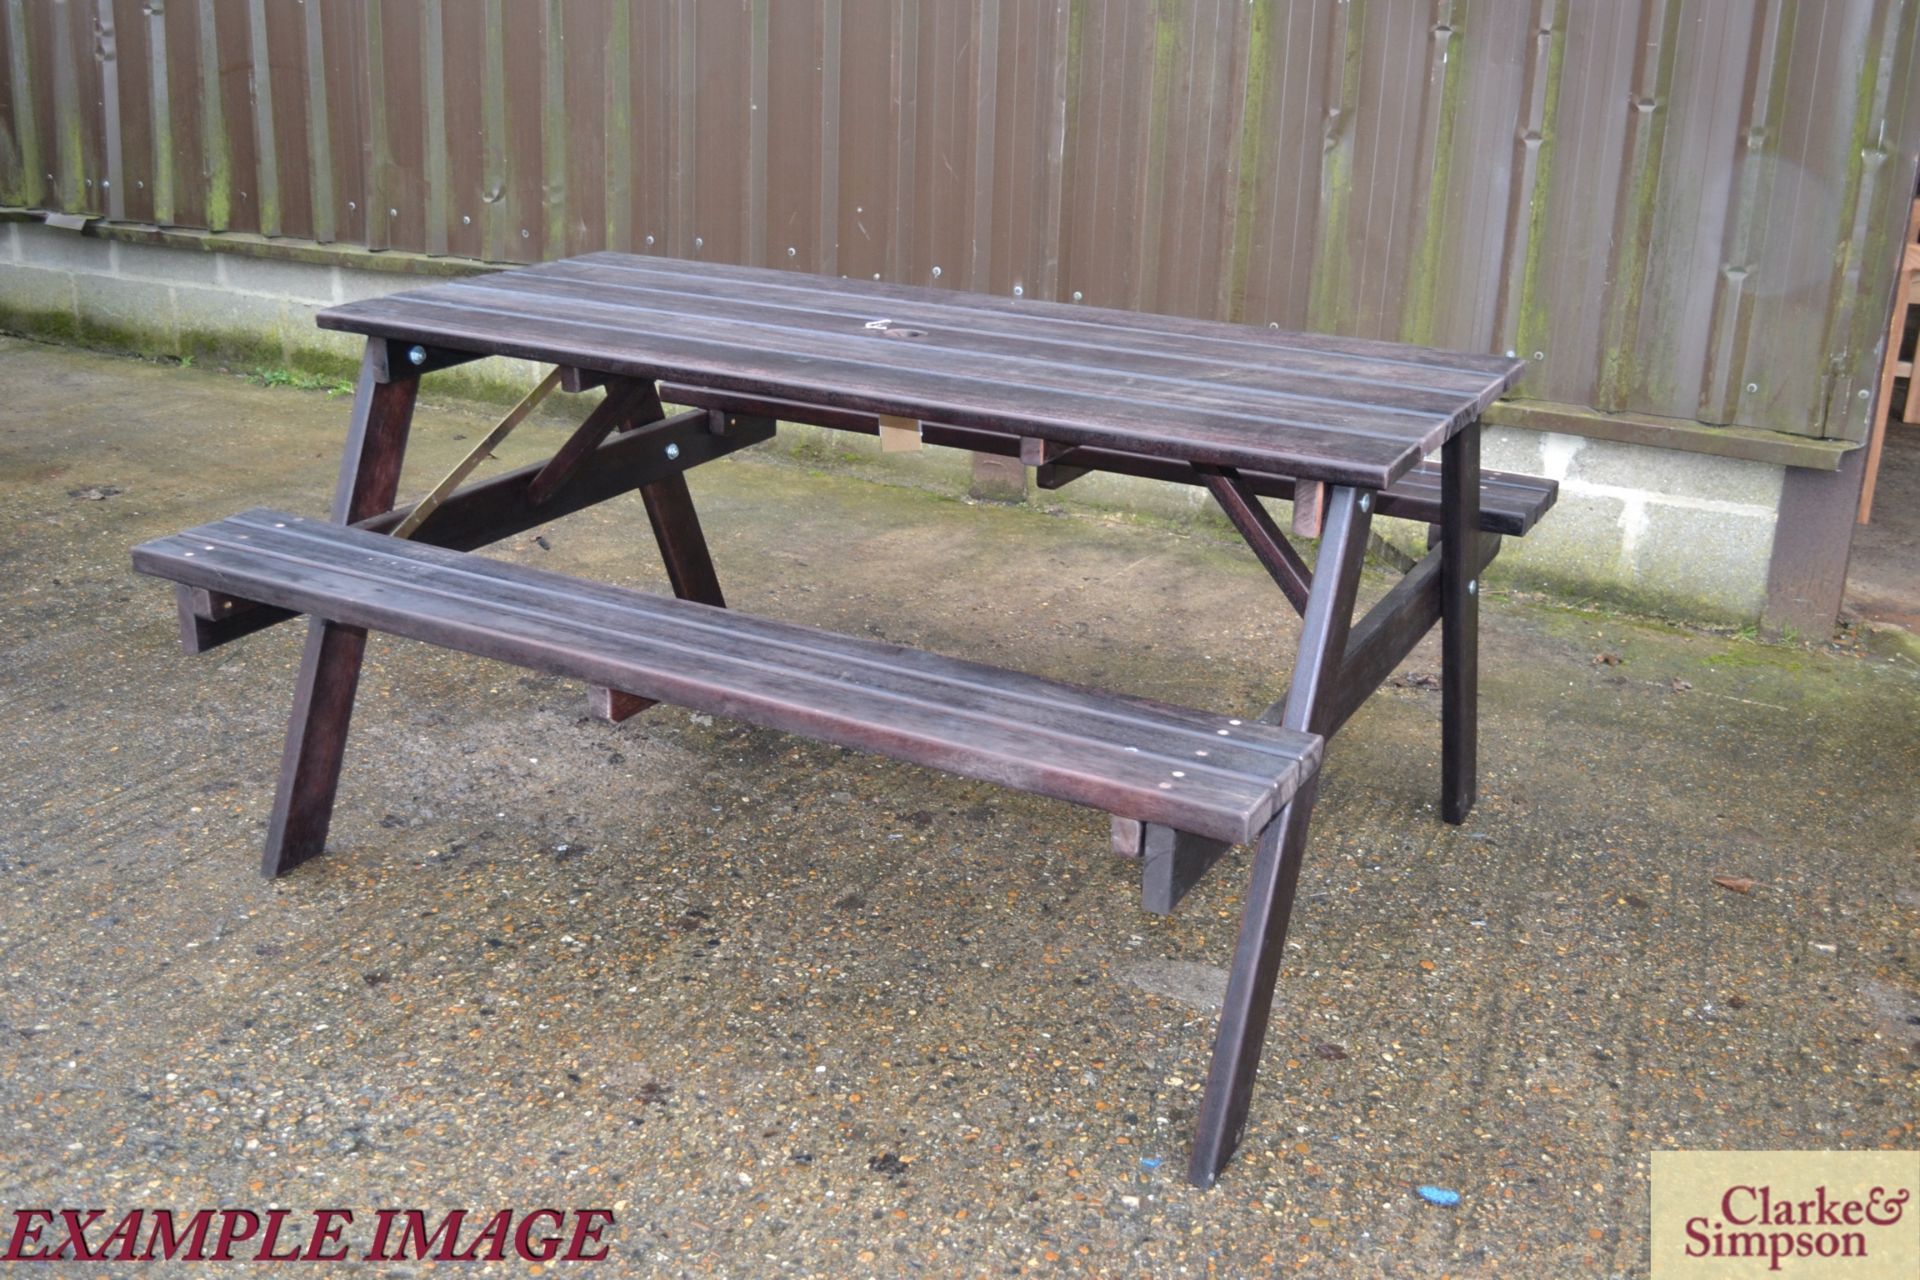 10x stained Eucalyptus 1.5m 6 seater picnic bench. - Image 3 of 6